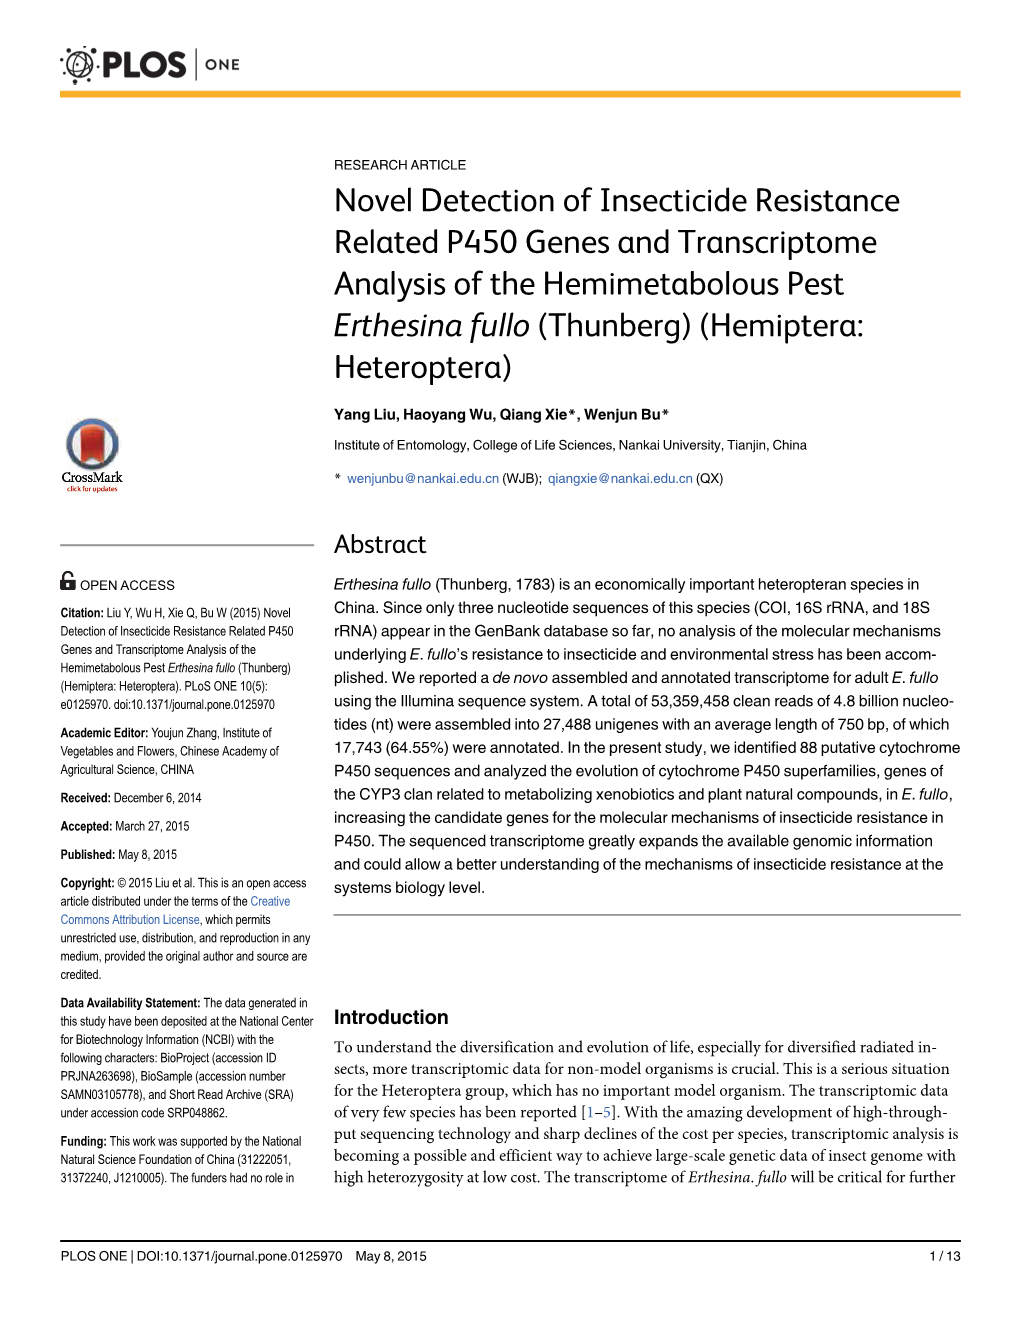 Novel Detection of Insecticide Resistance Related P450 Genes and Transcriptome Analysis of the Hemimetabolous Pest Erthesina Fullo (Thunberg) (Hemiptera: Heteroptera)